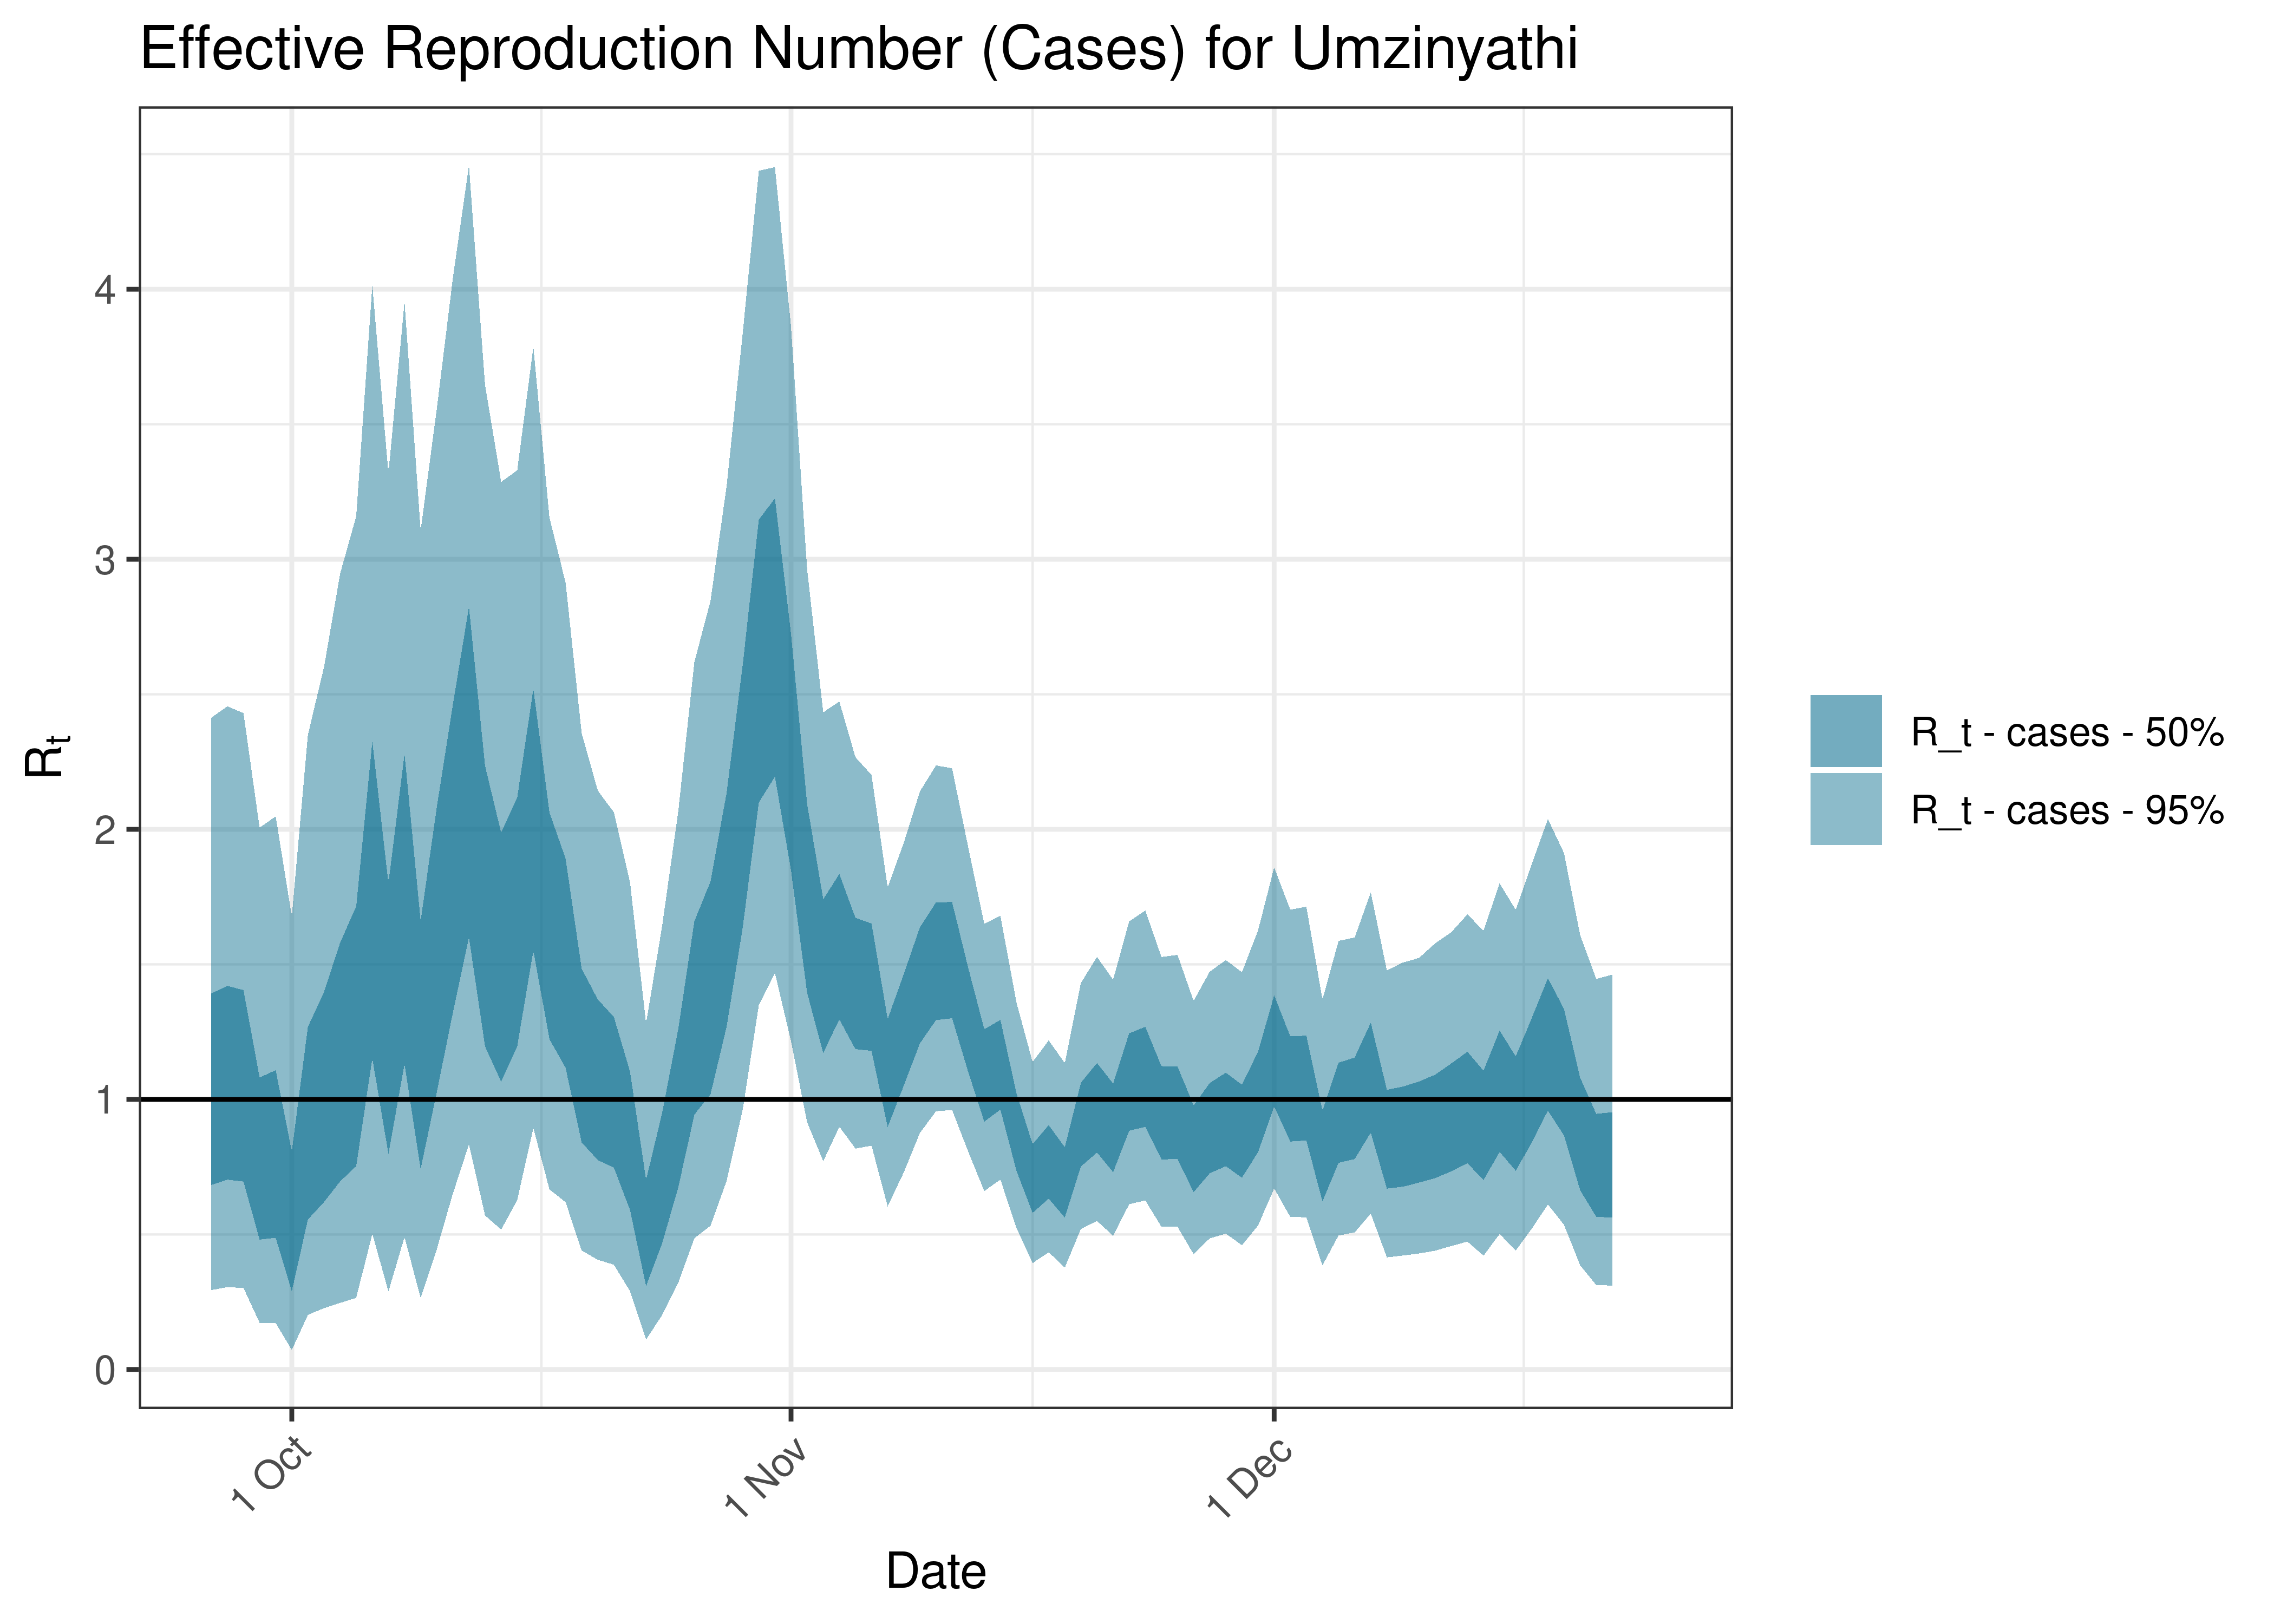 Estimated Effective Reproduction Number Based on Cases for Umzinyathi over last 90 days